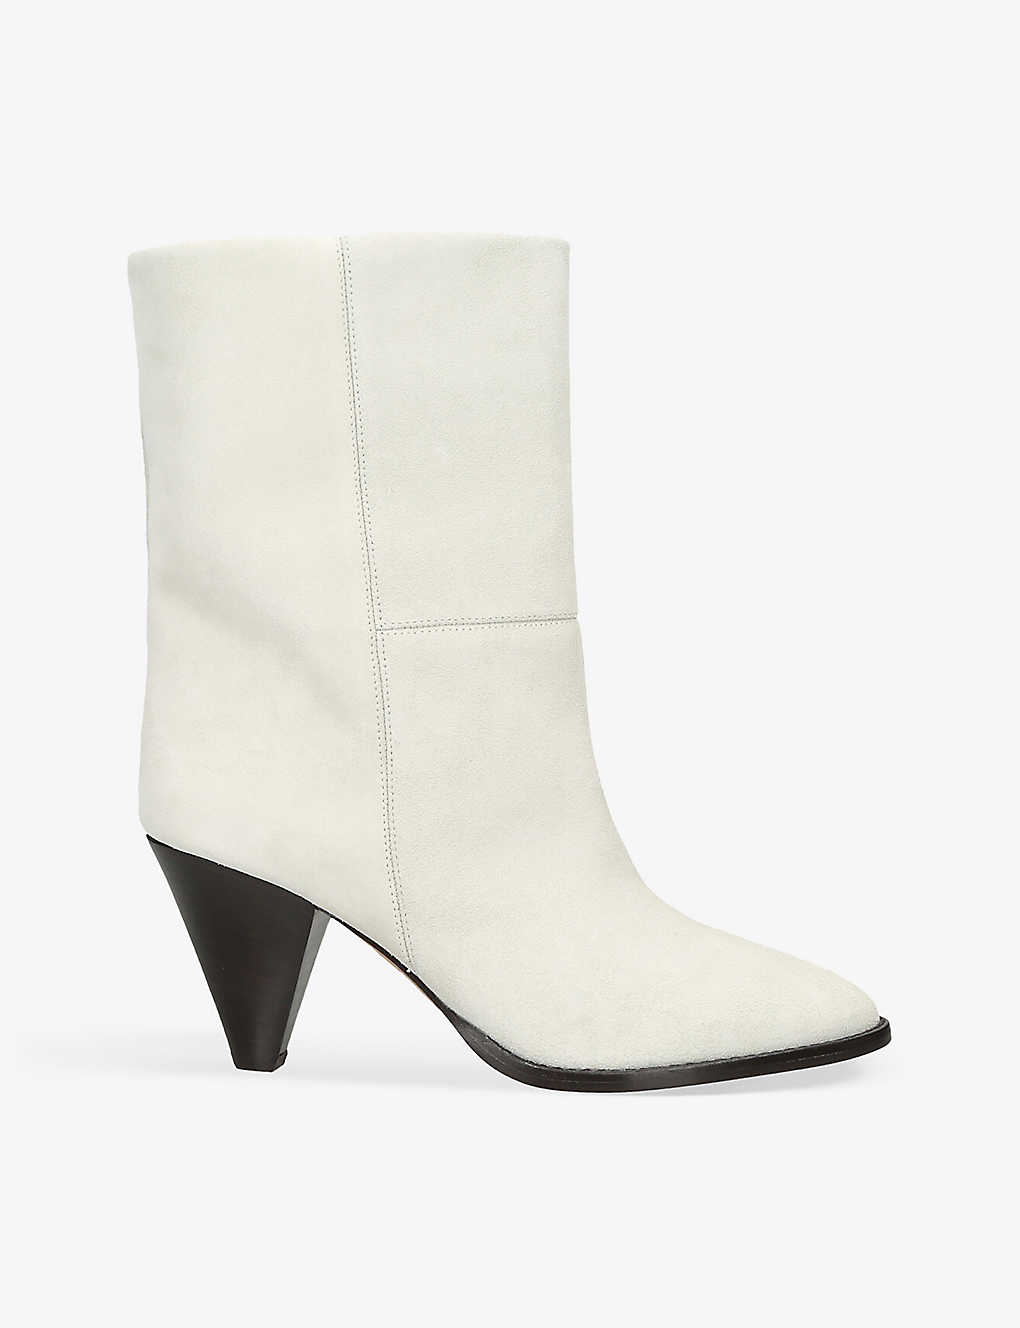 Isabel Marant Womens Winter Wht Rouxa Contrast-sole Suede Heeled Ankle Boots